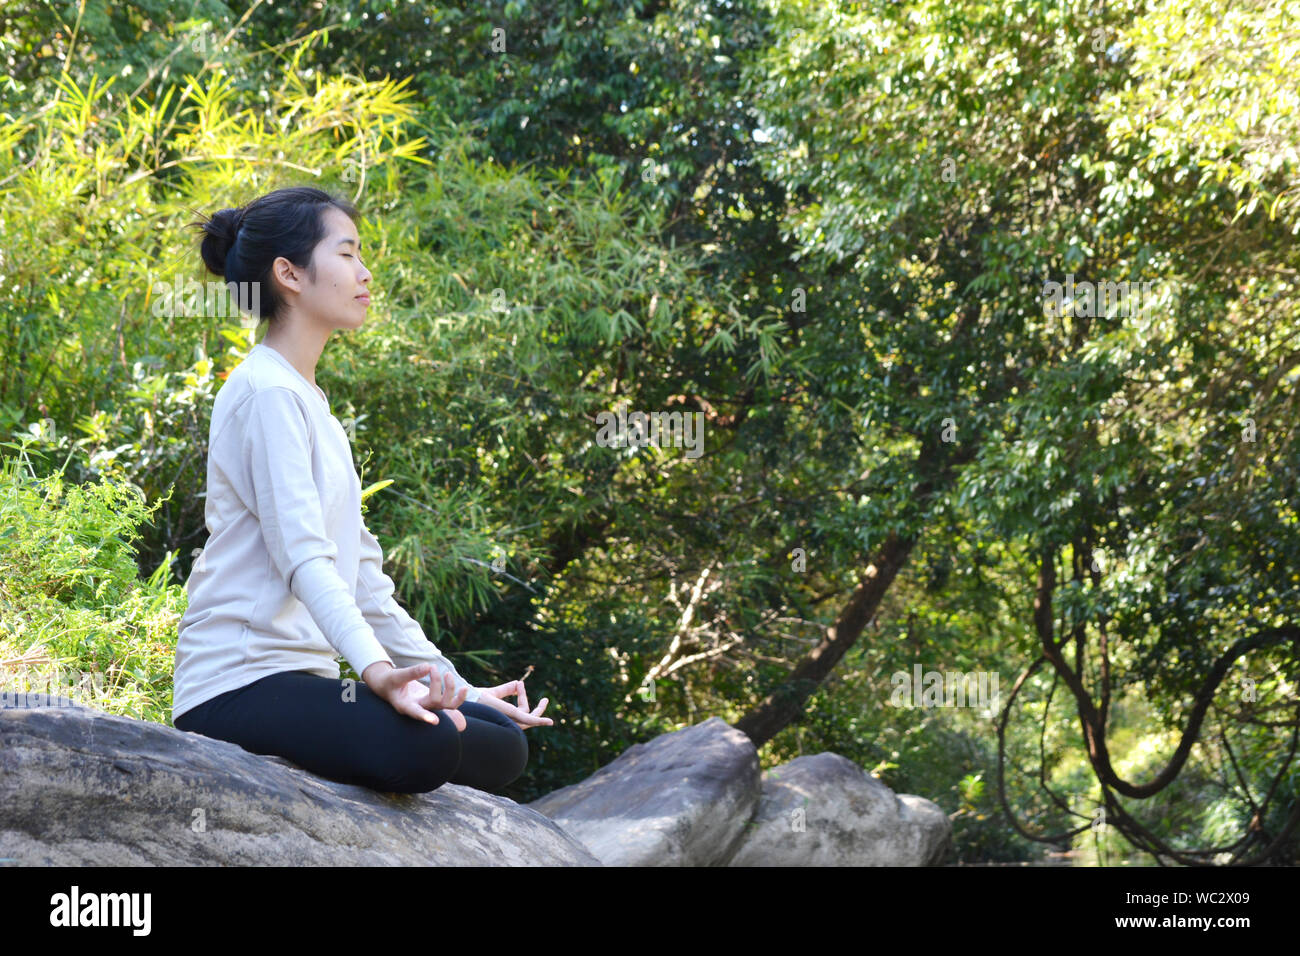 Side View Of Woman Practicing Lotus Position On Rock Against Plants Stock Photo